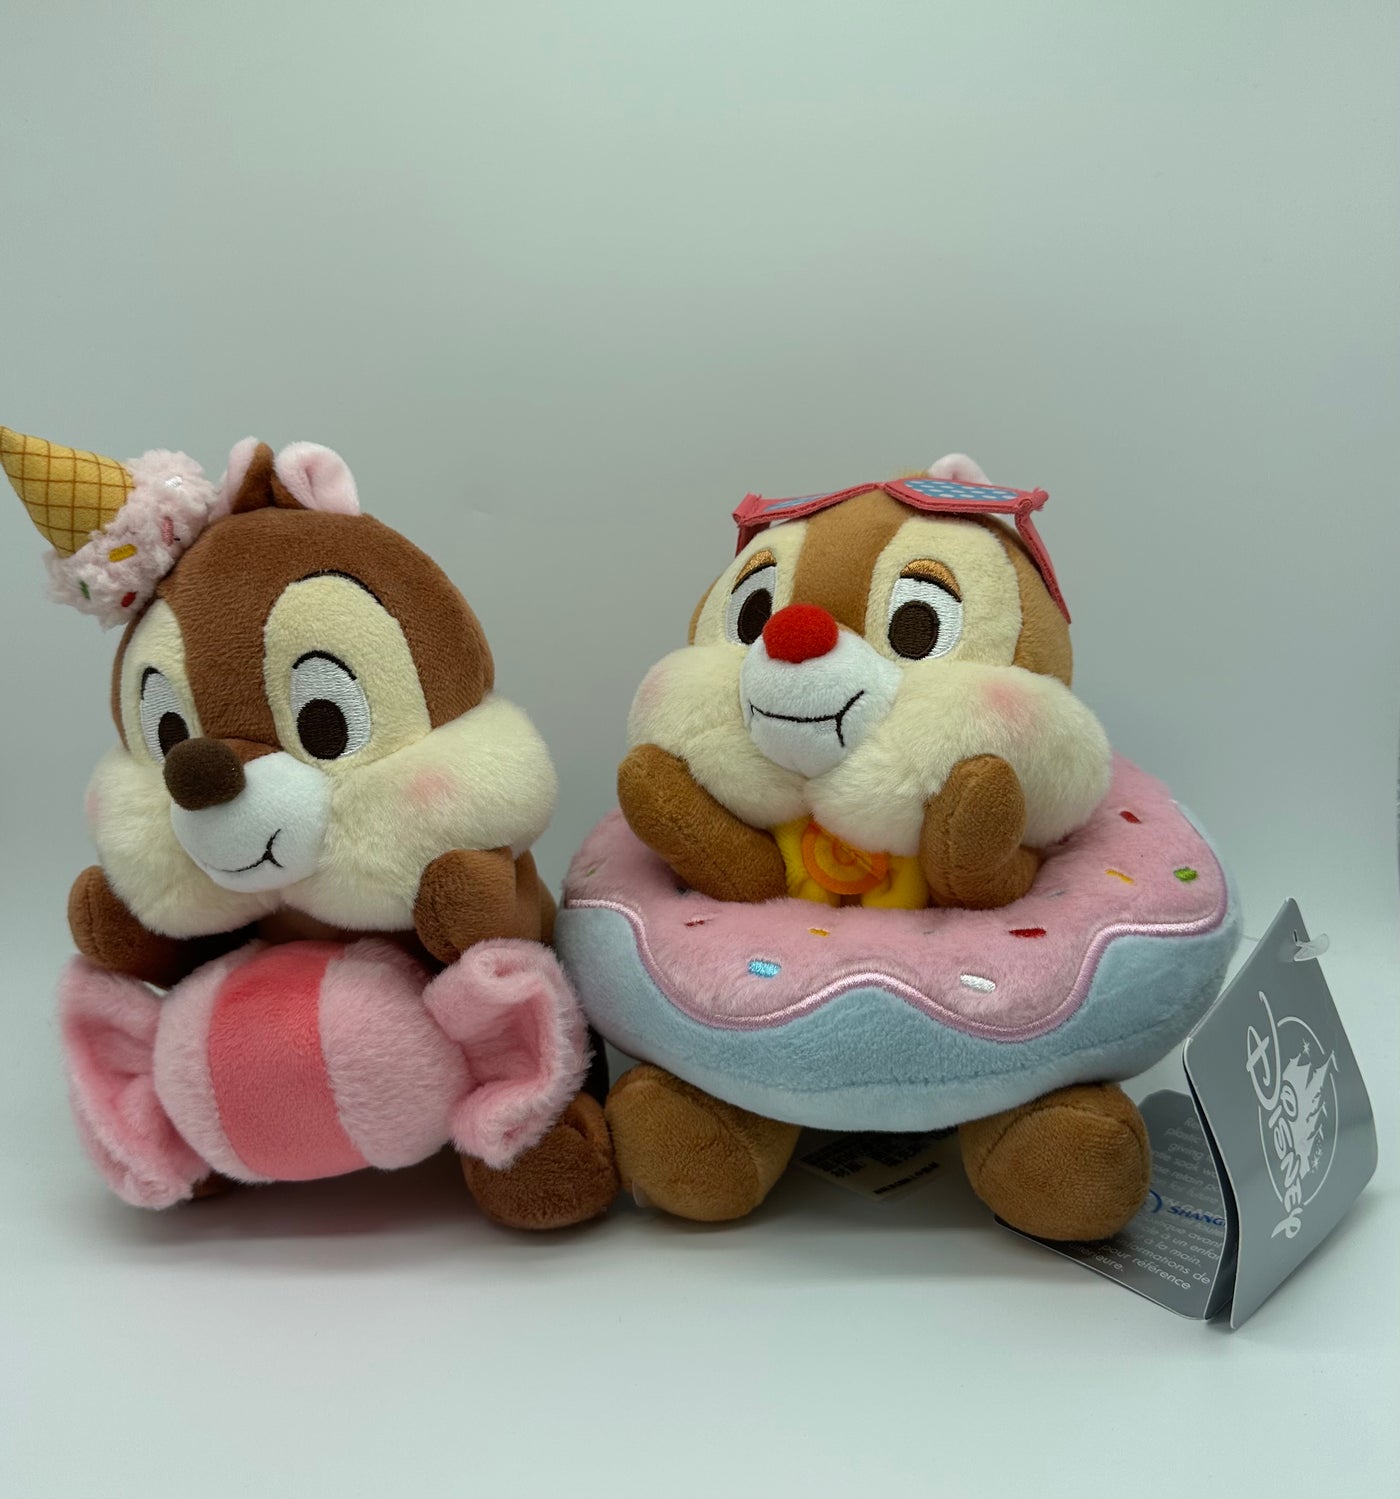 Disney Store Japan Authentic Chip 'n Dale Sweet Donut Candy Plush New with Tag